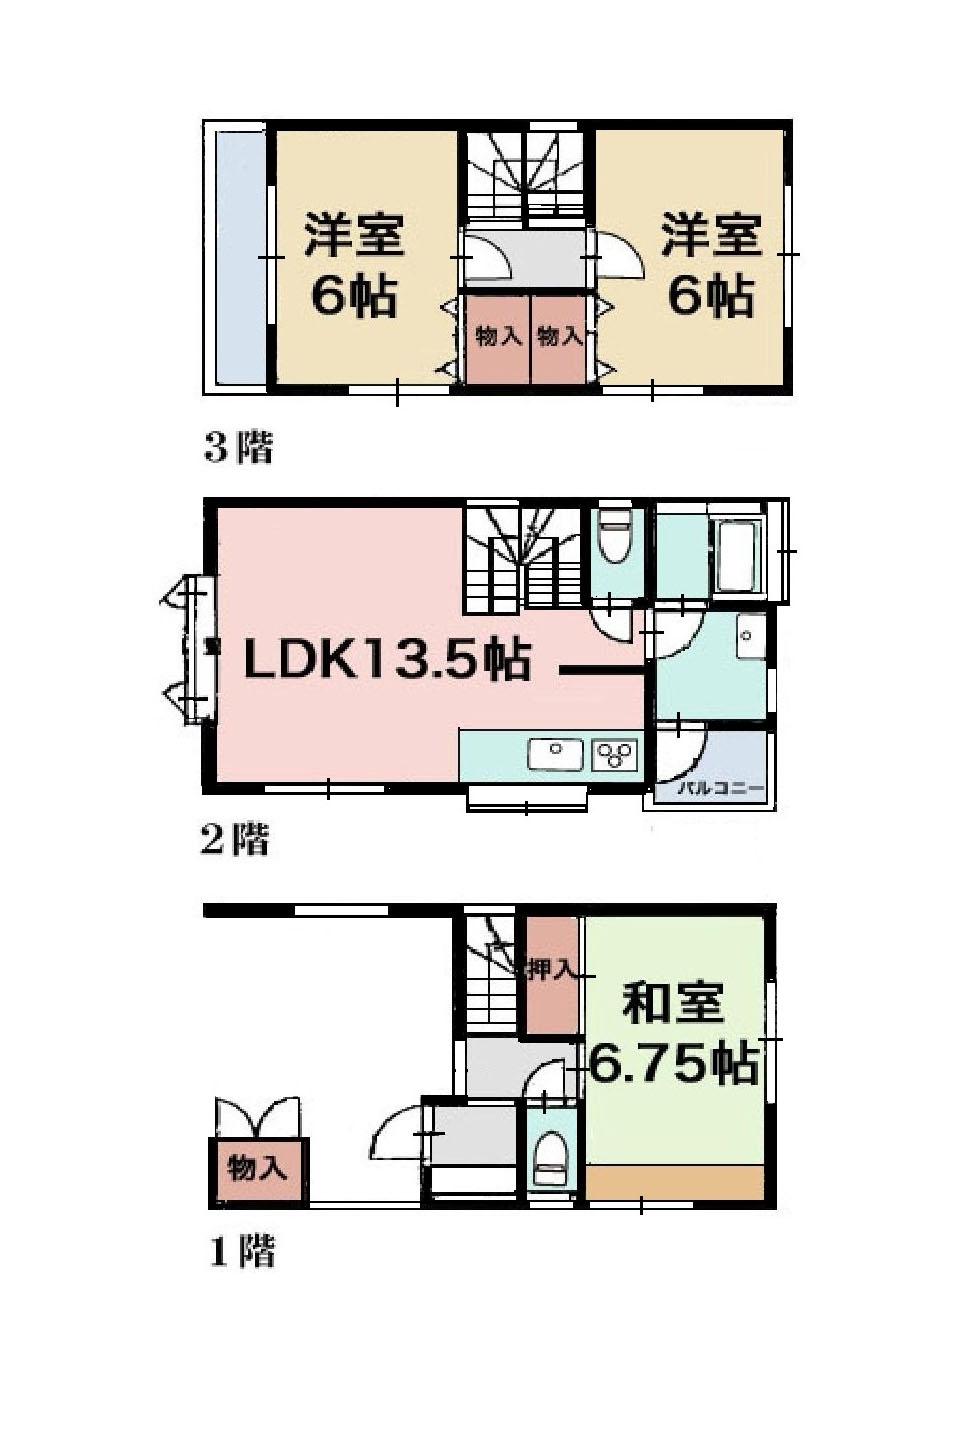 Floor plan. 23.8 million yen, 3LDK, Land area 54.87 sq m , Building area 89 sq m healing of Japanese-style Ali 3LDK! Room All rooms 6 quires more! Second floor LDK is a feeling of opening Ali! 